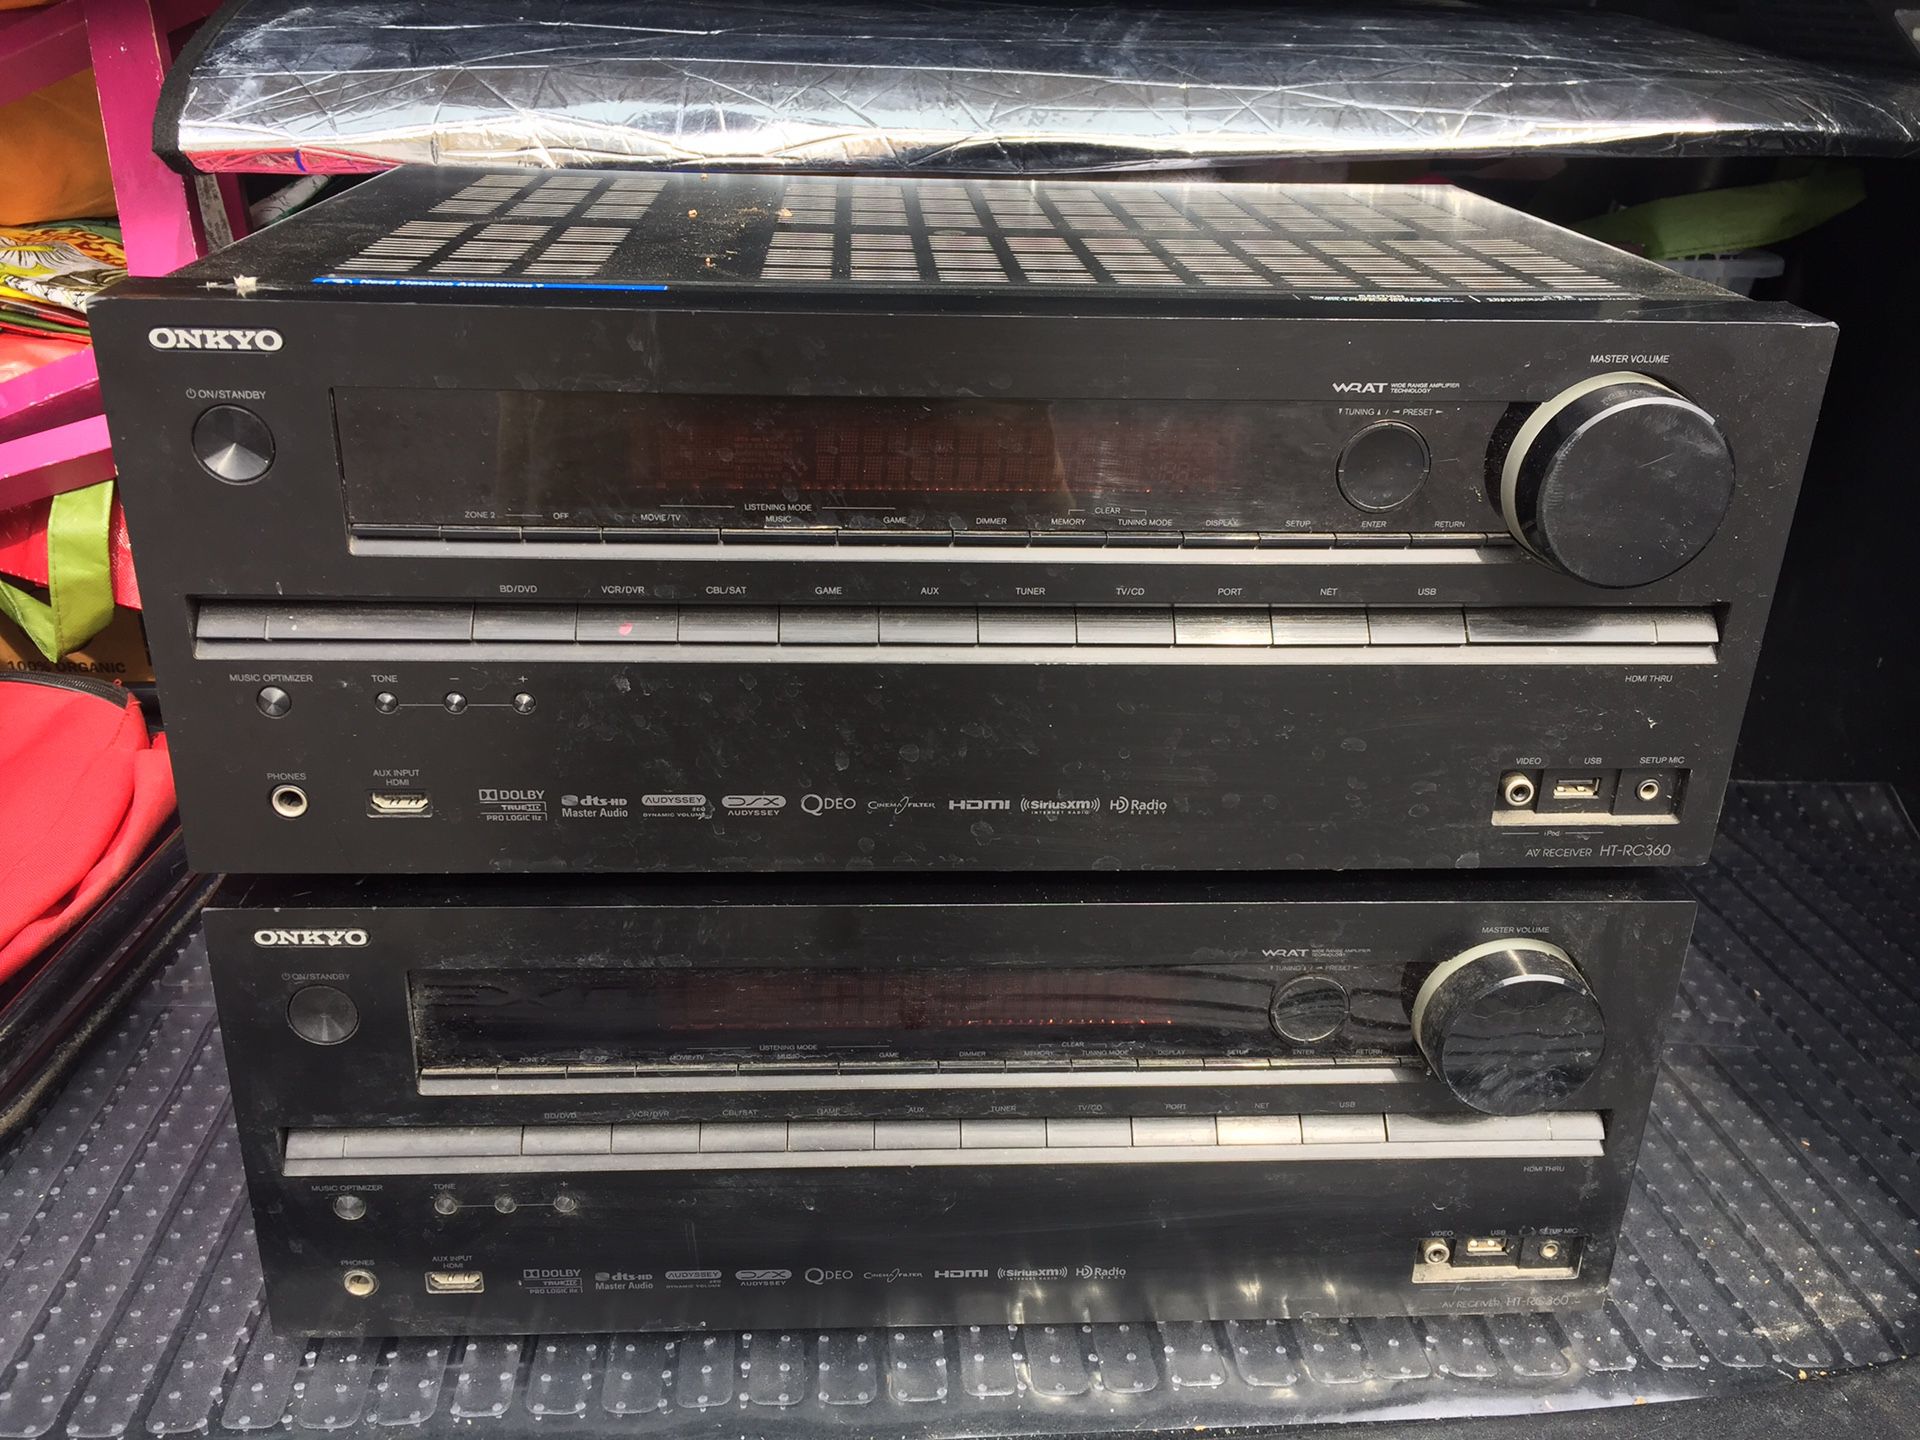 LOT OF 2 ONKYO HT-RC360 AV RECEIVER HDMI ( POWER ON , NO SOUND ) SOLD FOR PART OR REPAIR